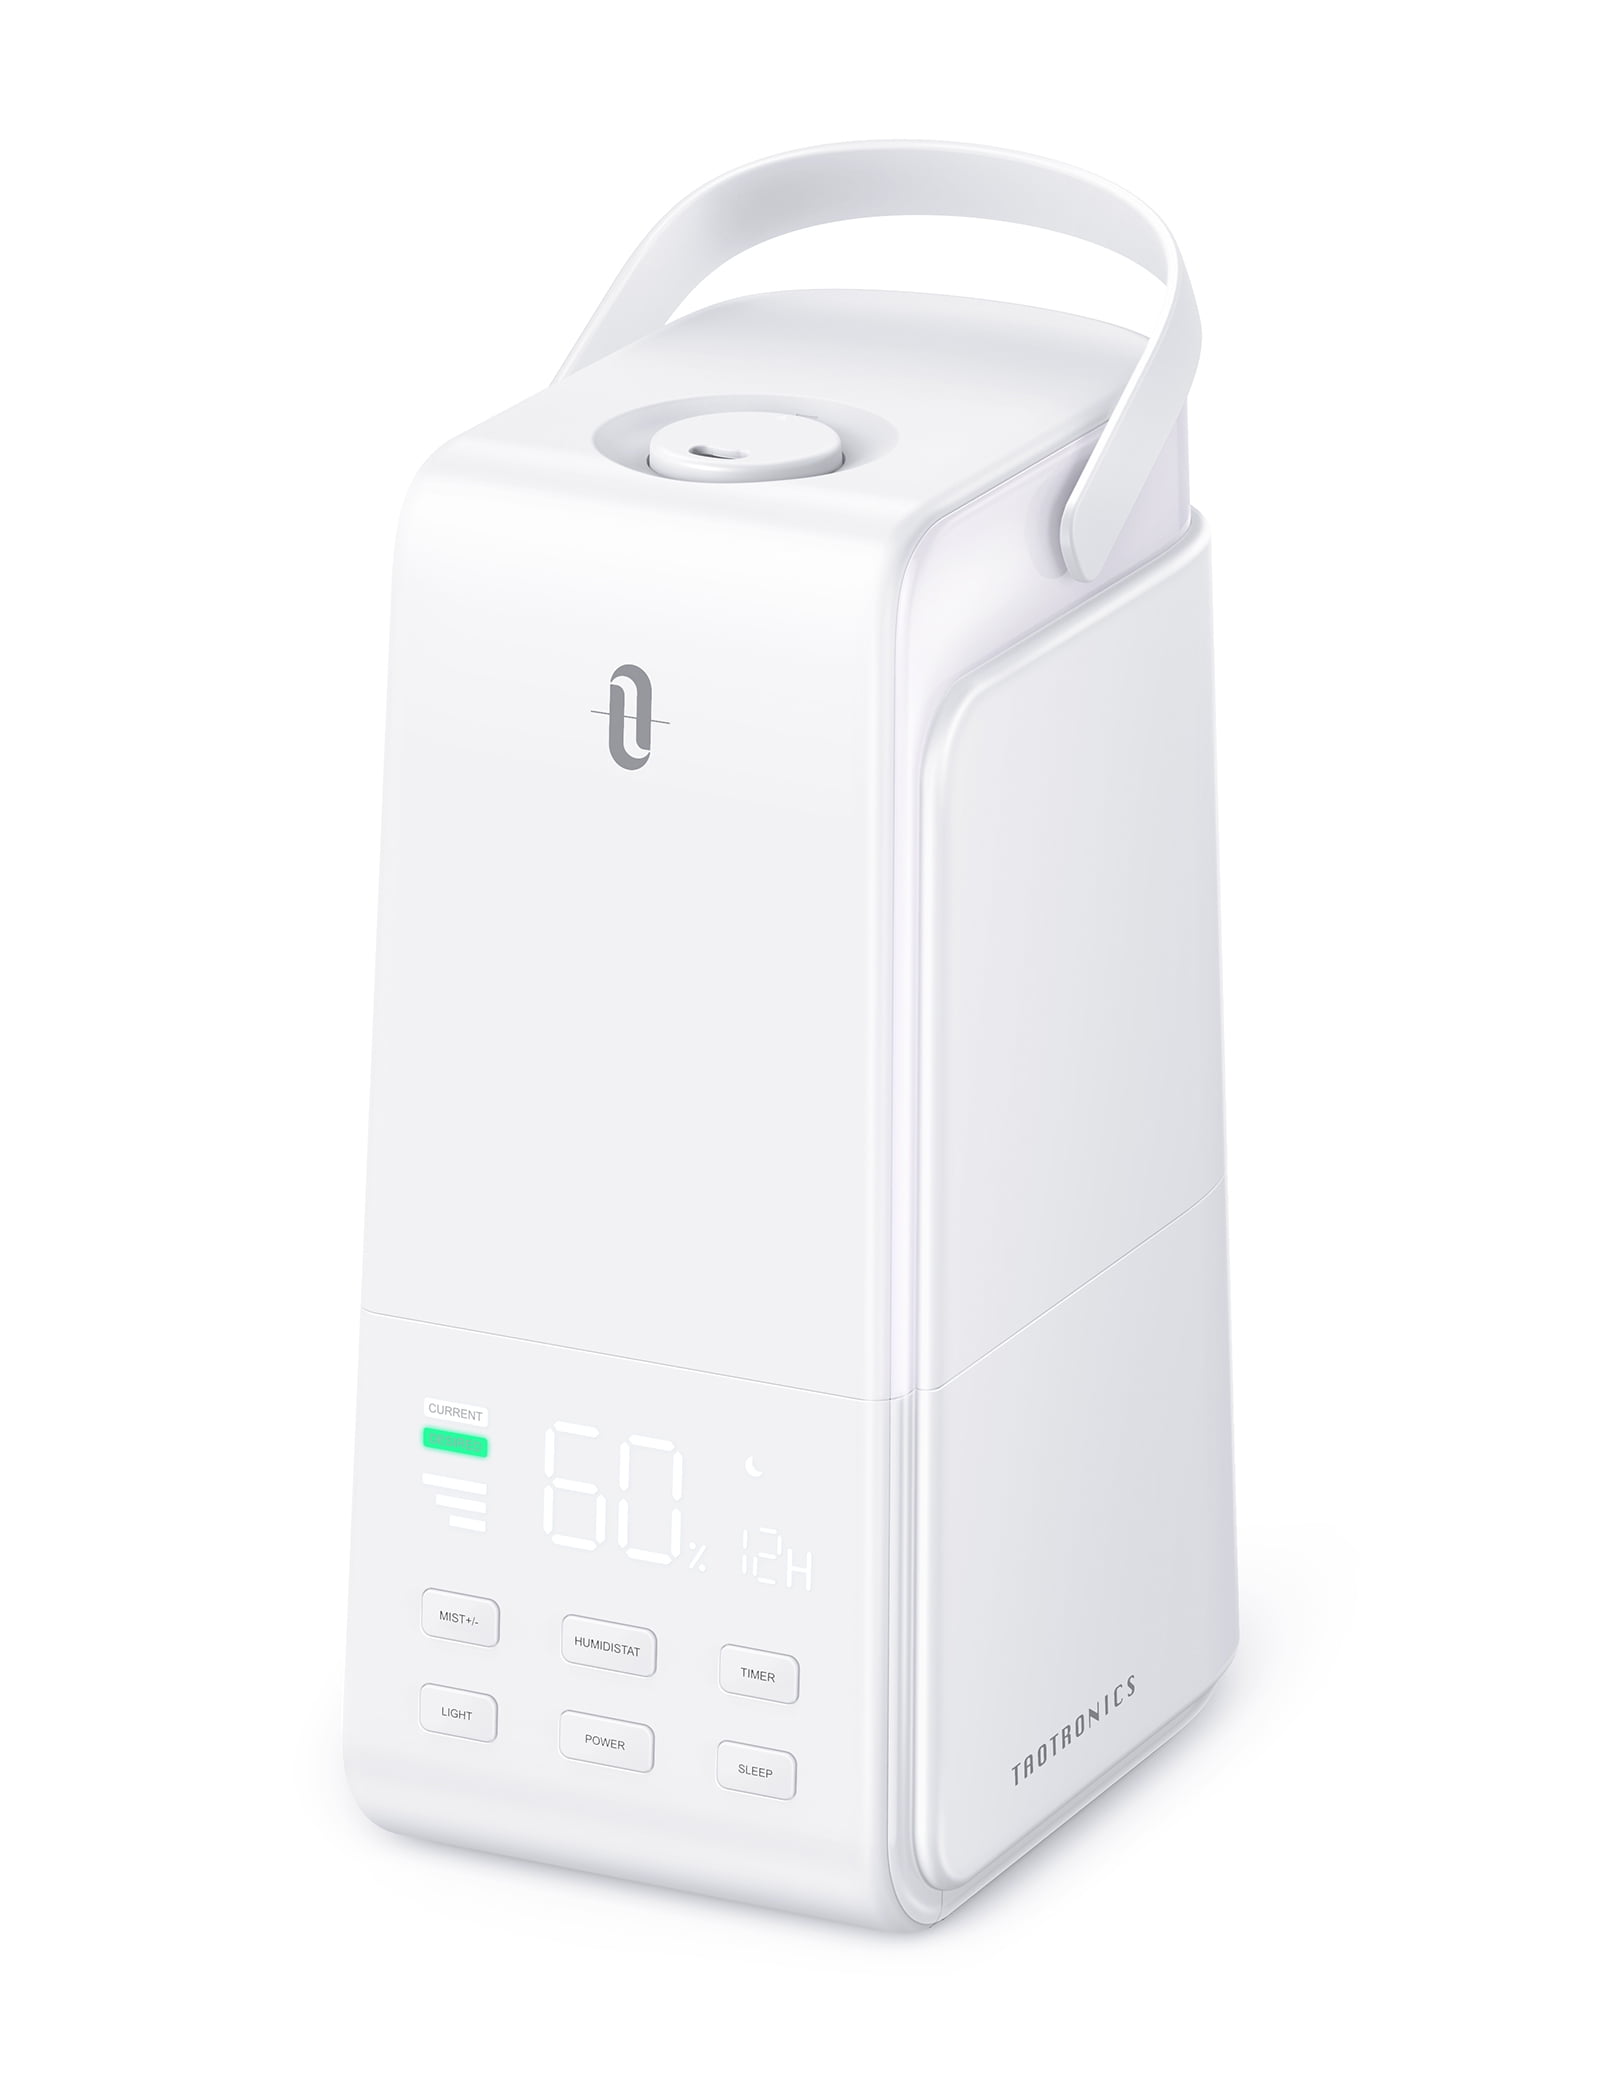 4L Ultrasonic Cool Mist Humidifier with Automatic Humidity Monitoring